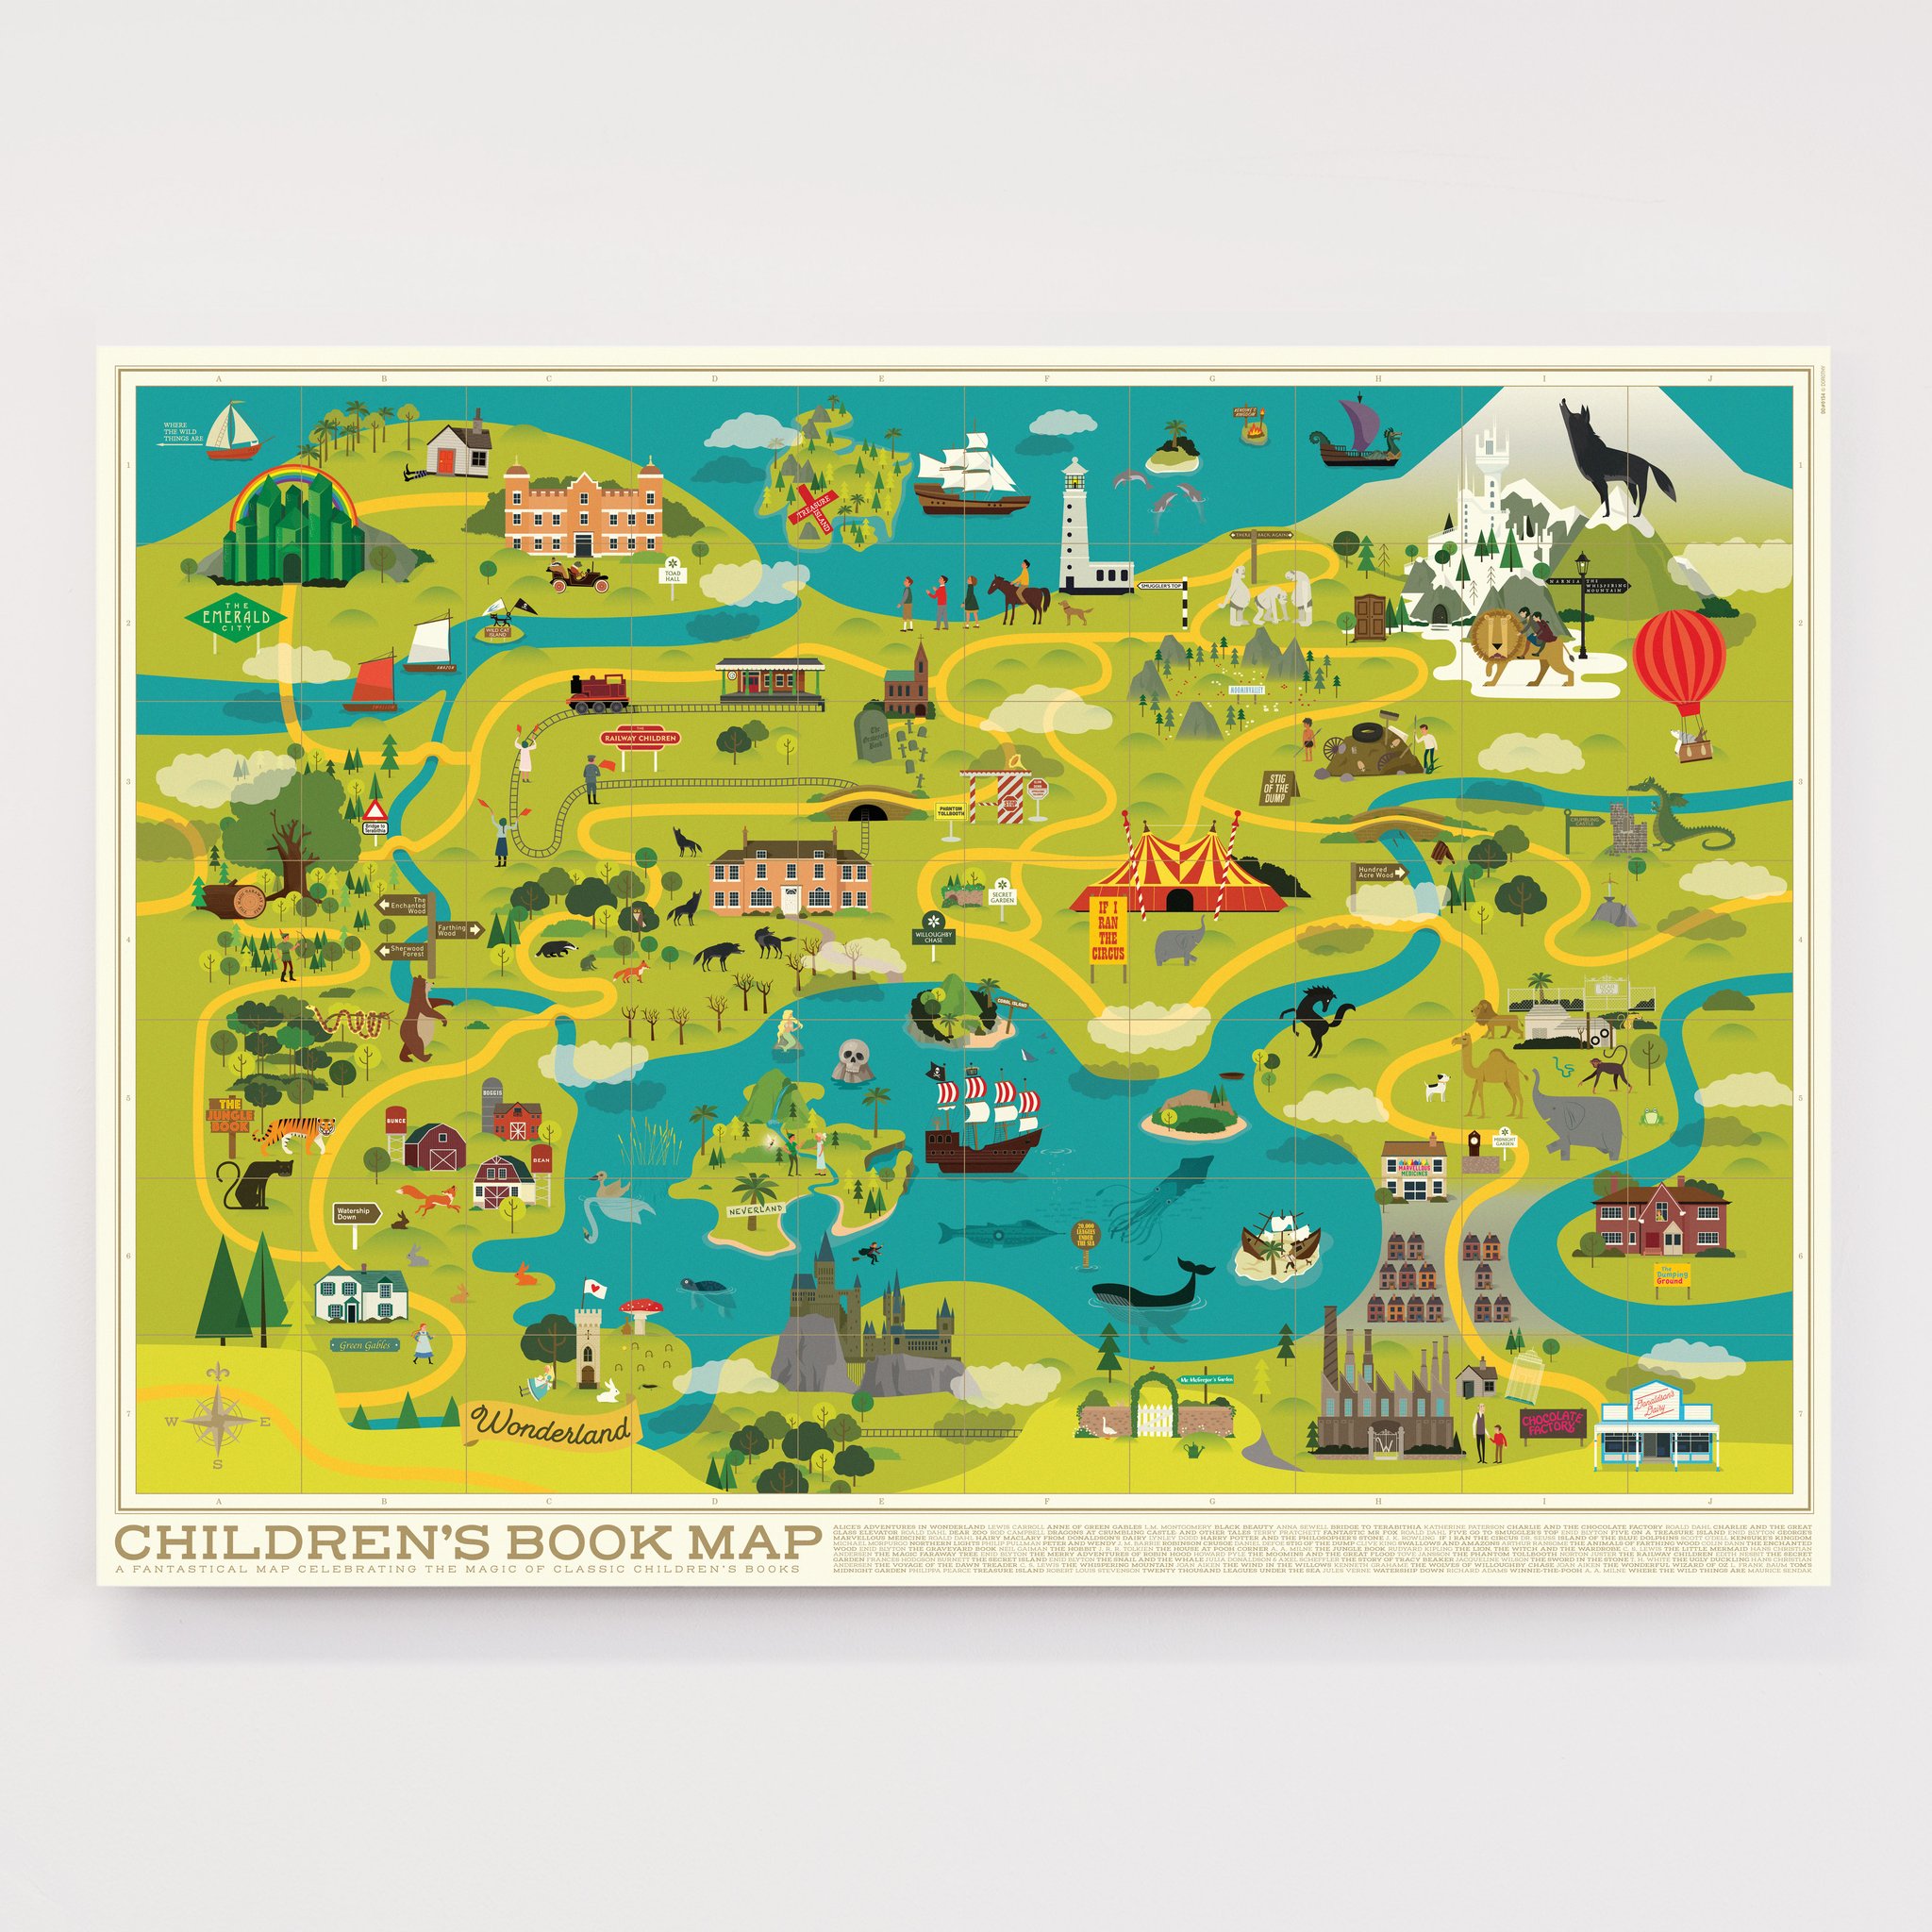 Children's Book Map, by Dorothy